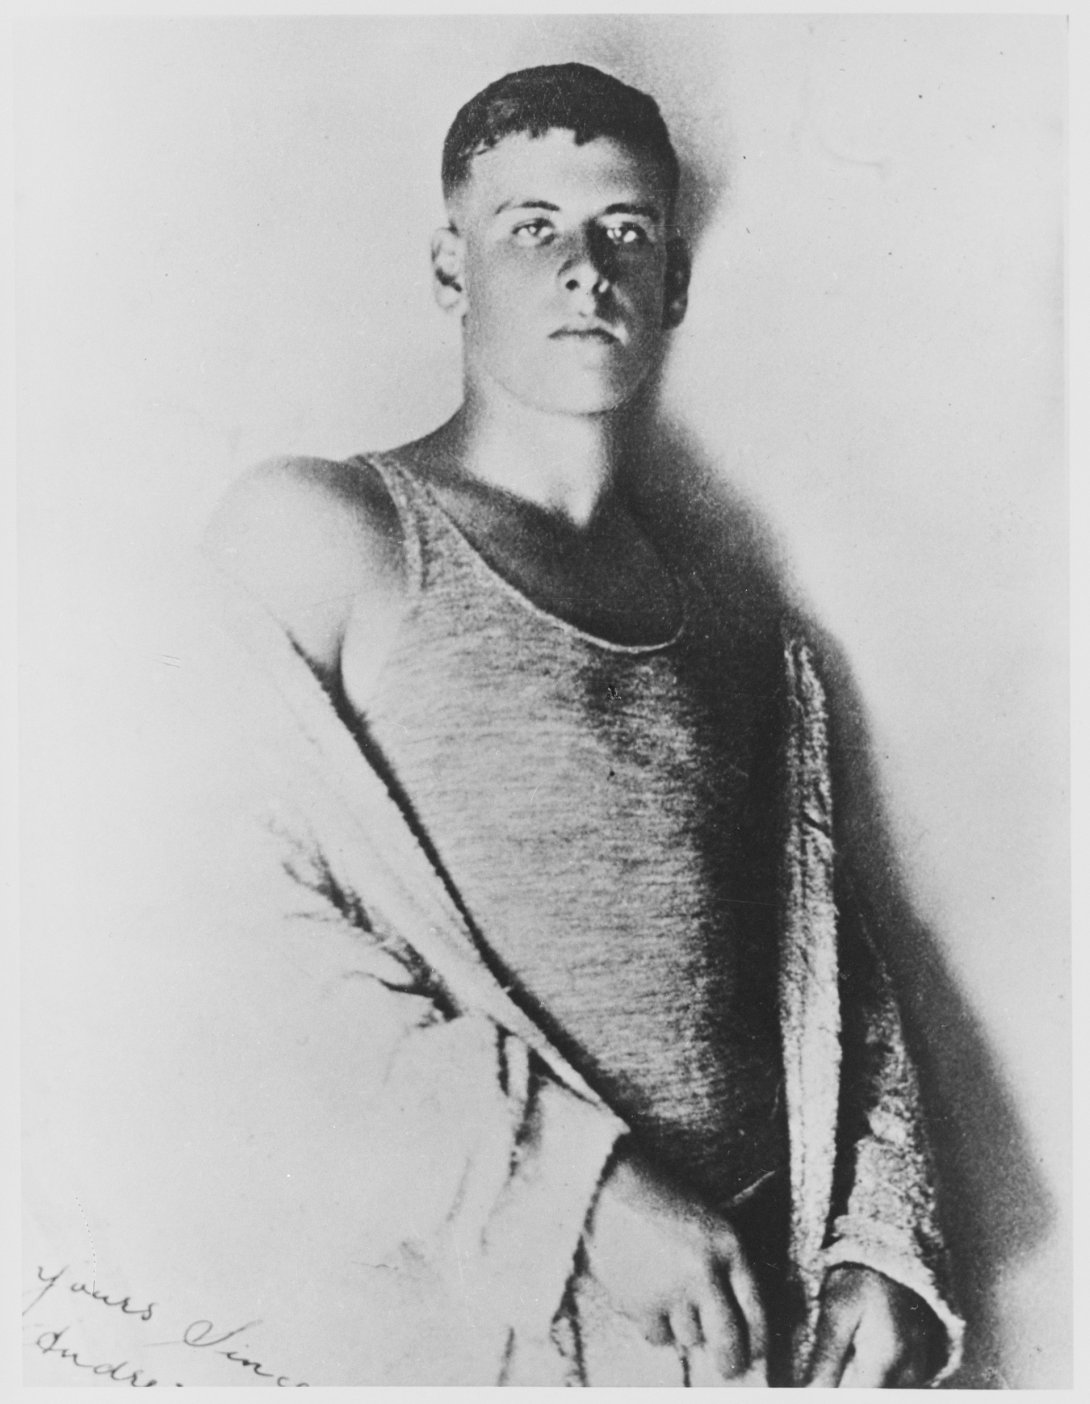 Black and white photo of young male swimmer wearing a singlet and robe looking seriously at the camera